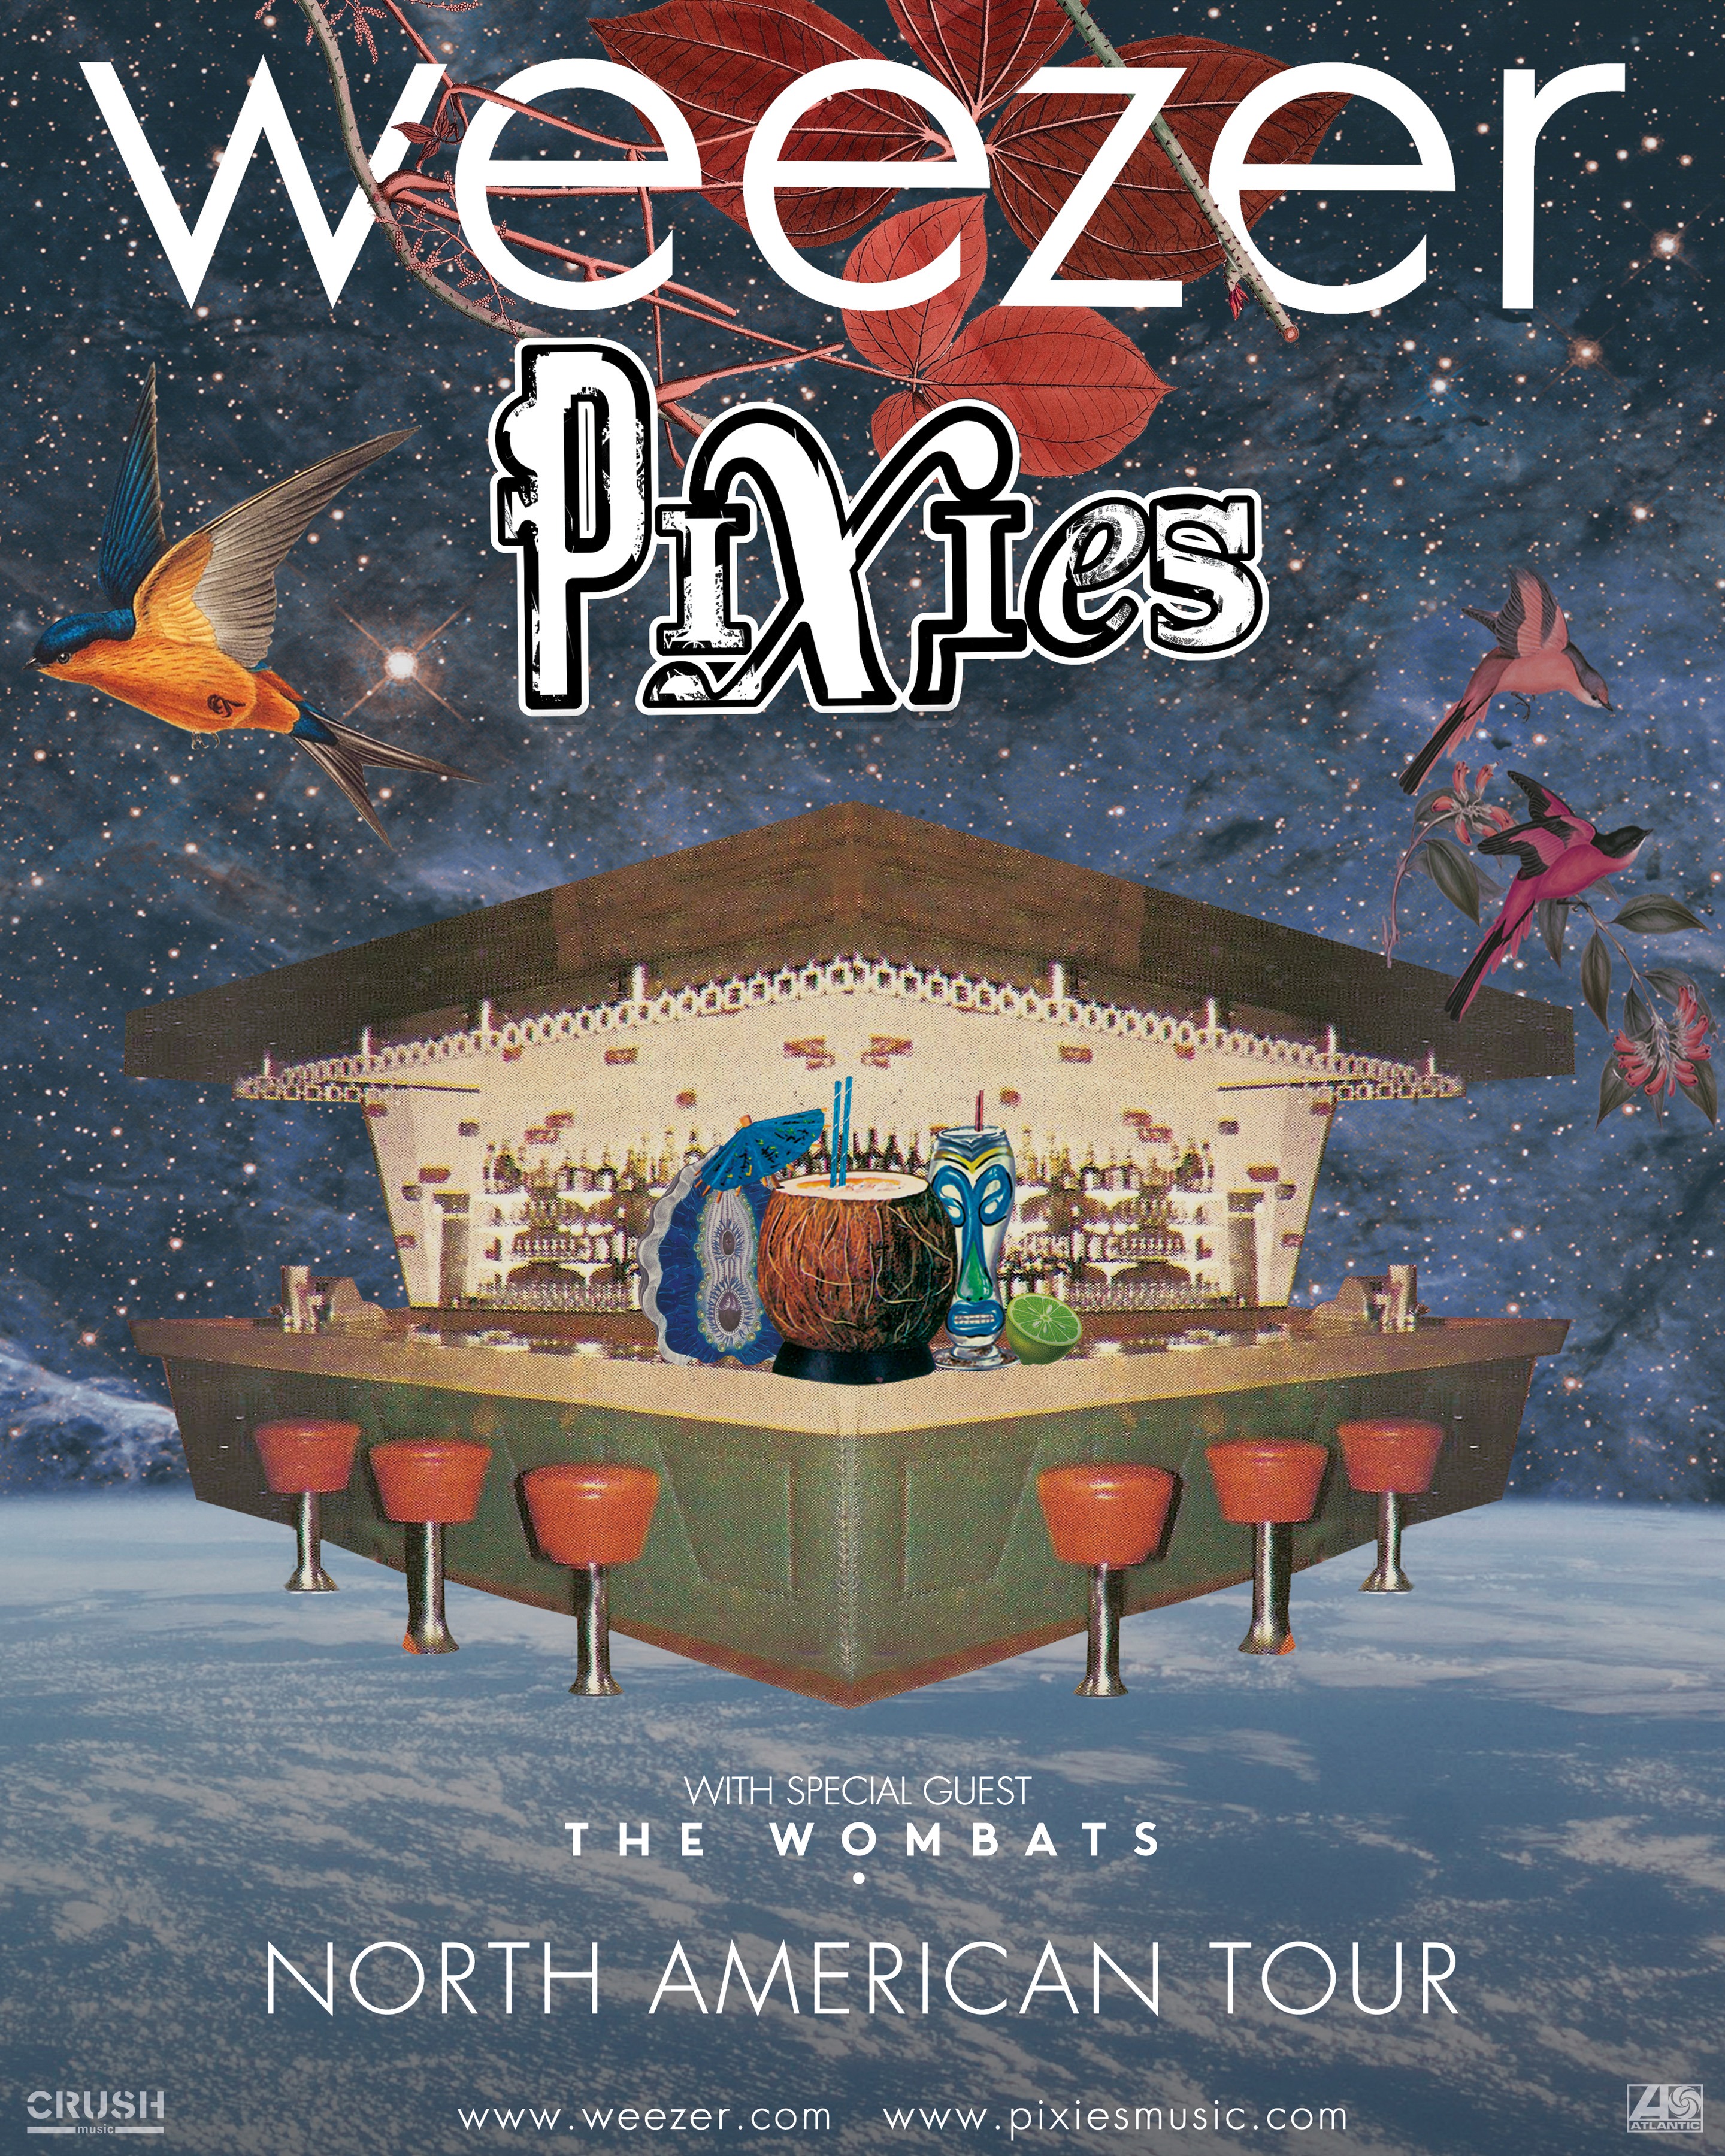 WEEZER AND PIXIES ANNOUNCE SUMMER 2018 CO-HEADLINE TOUR